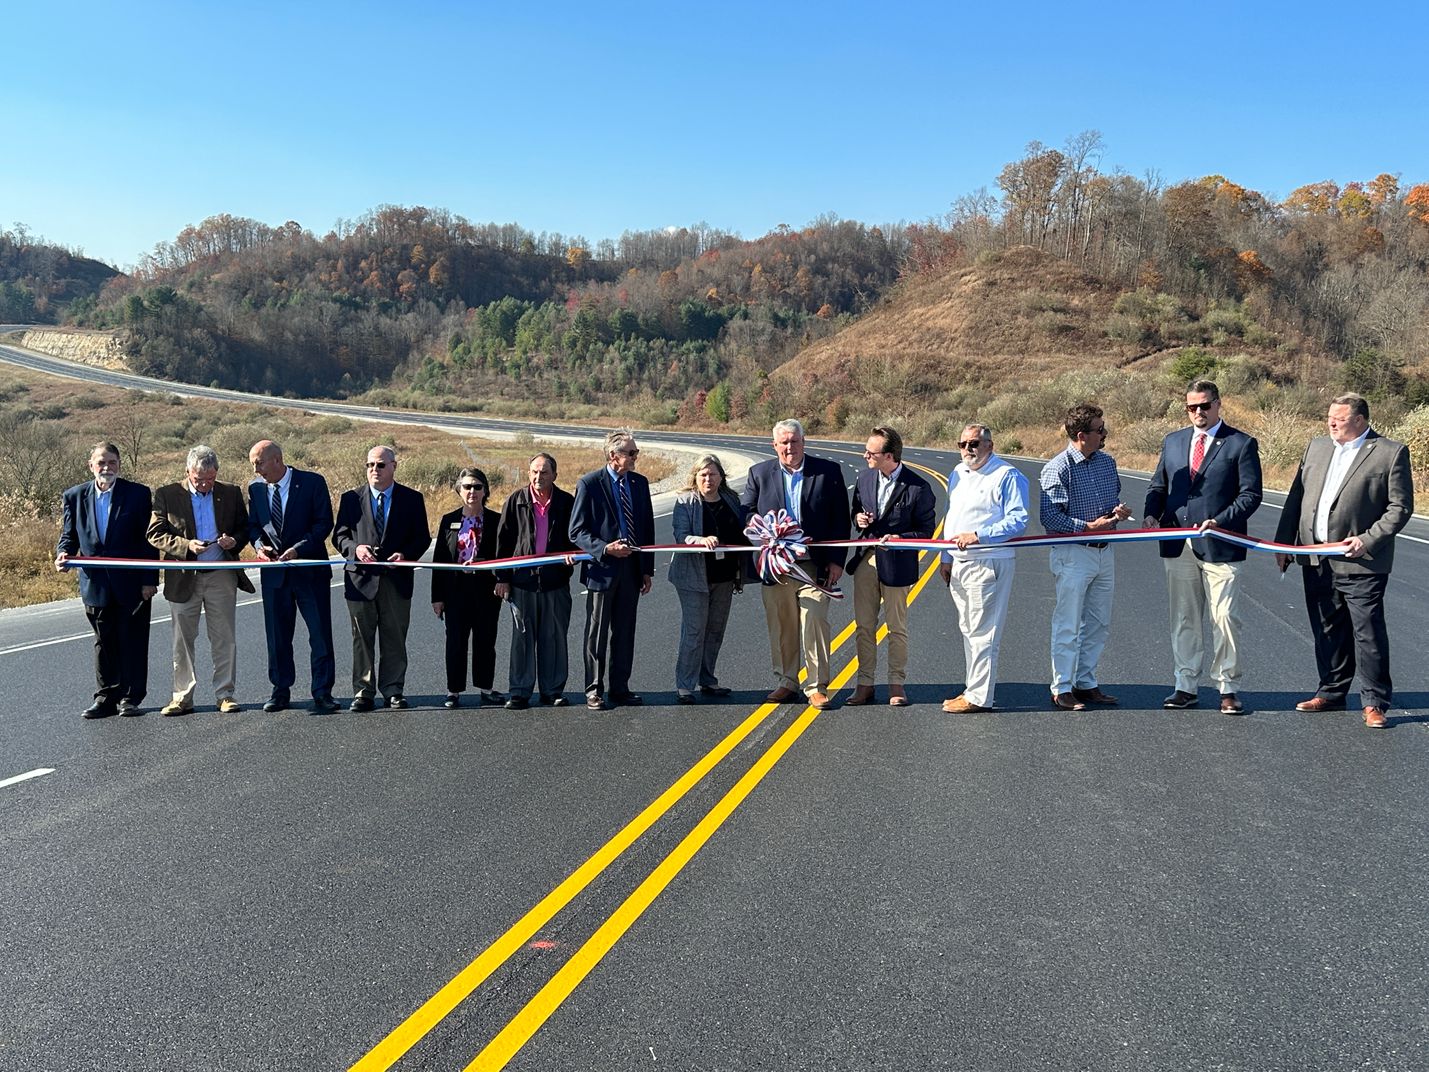 ribbon cutting ceremony along 460/121 for a new eight-mile stretch of road